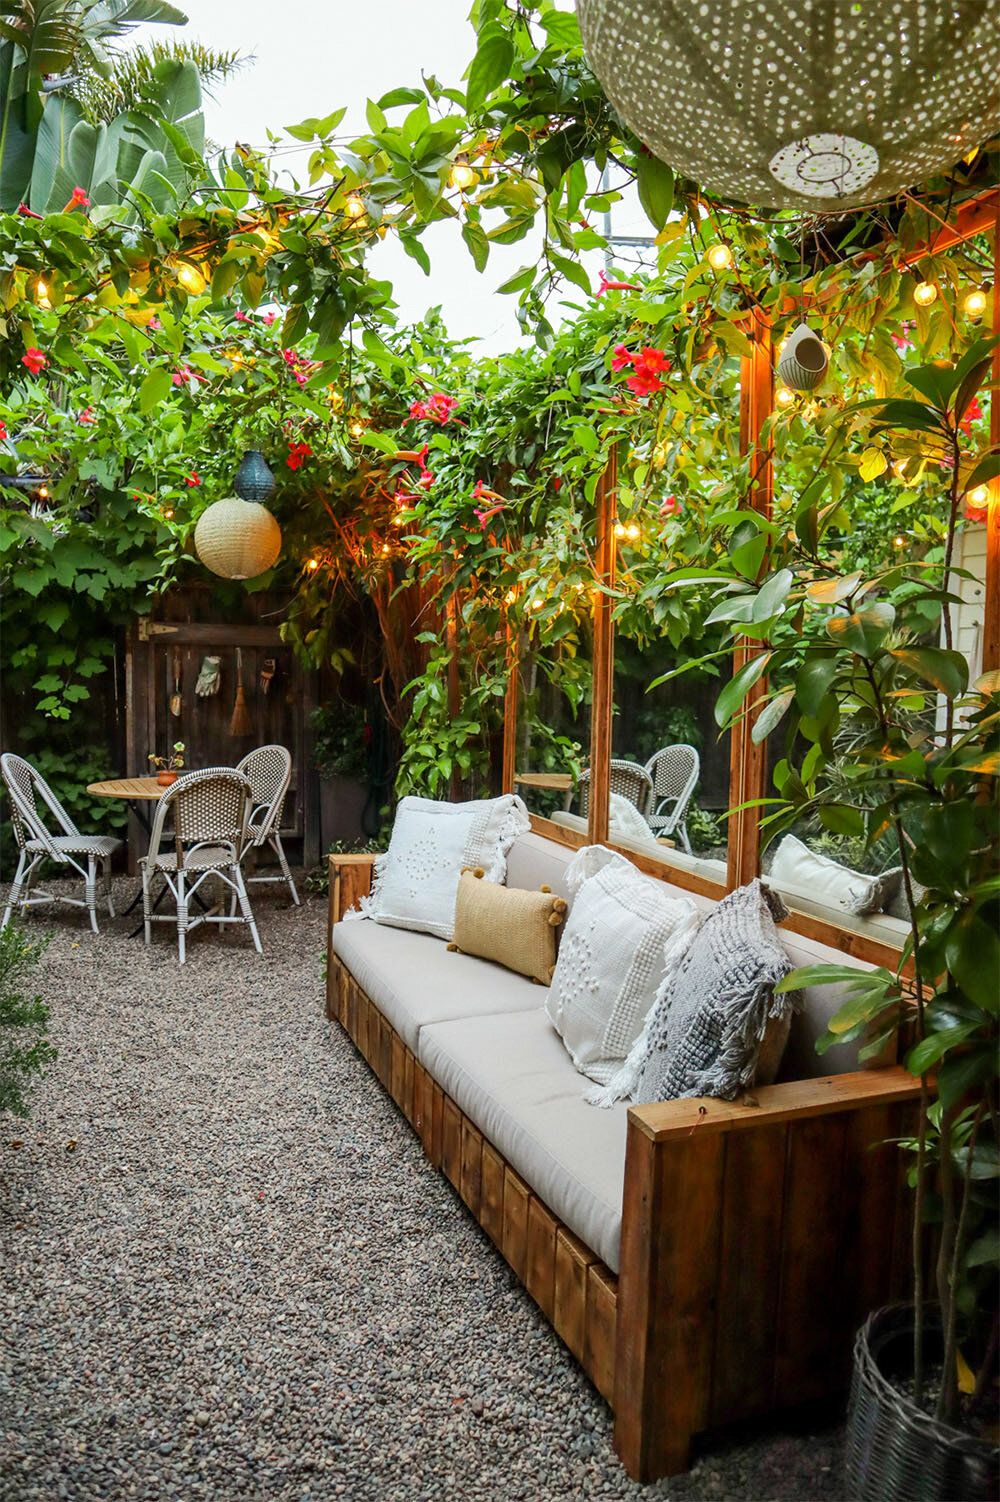 Terrace with many plants and outdoor couch